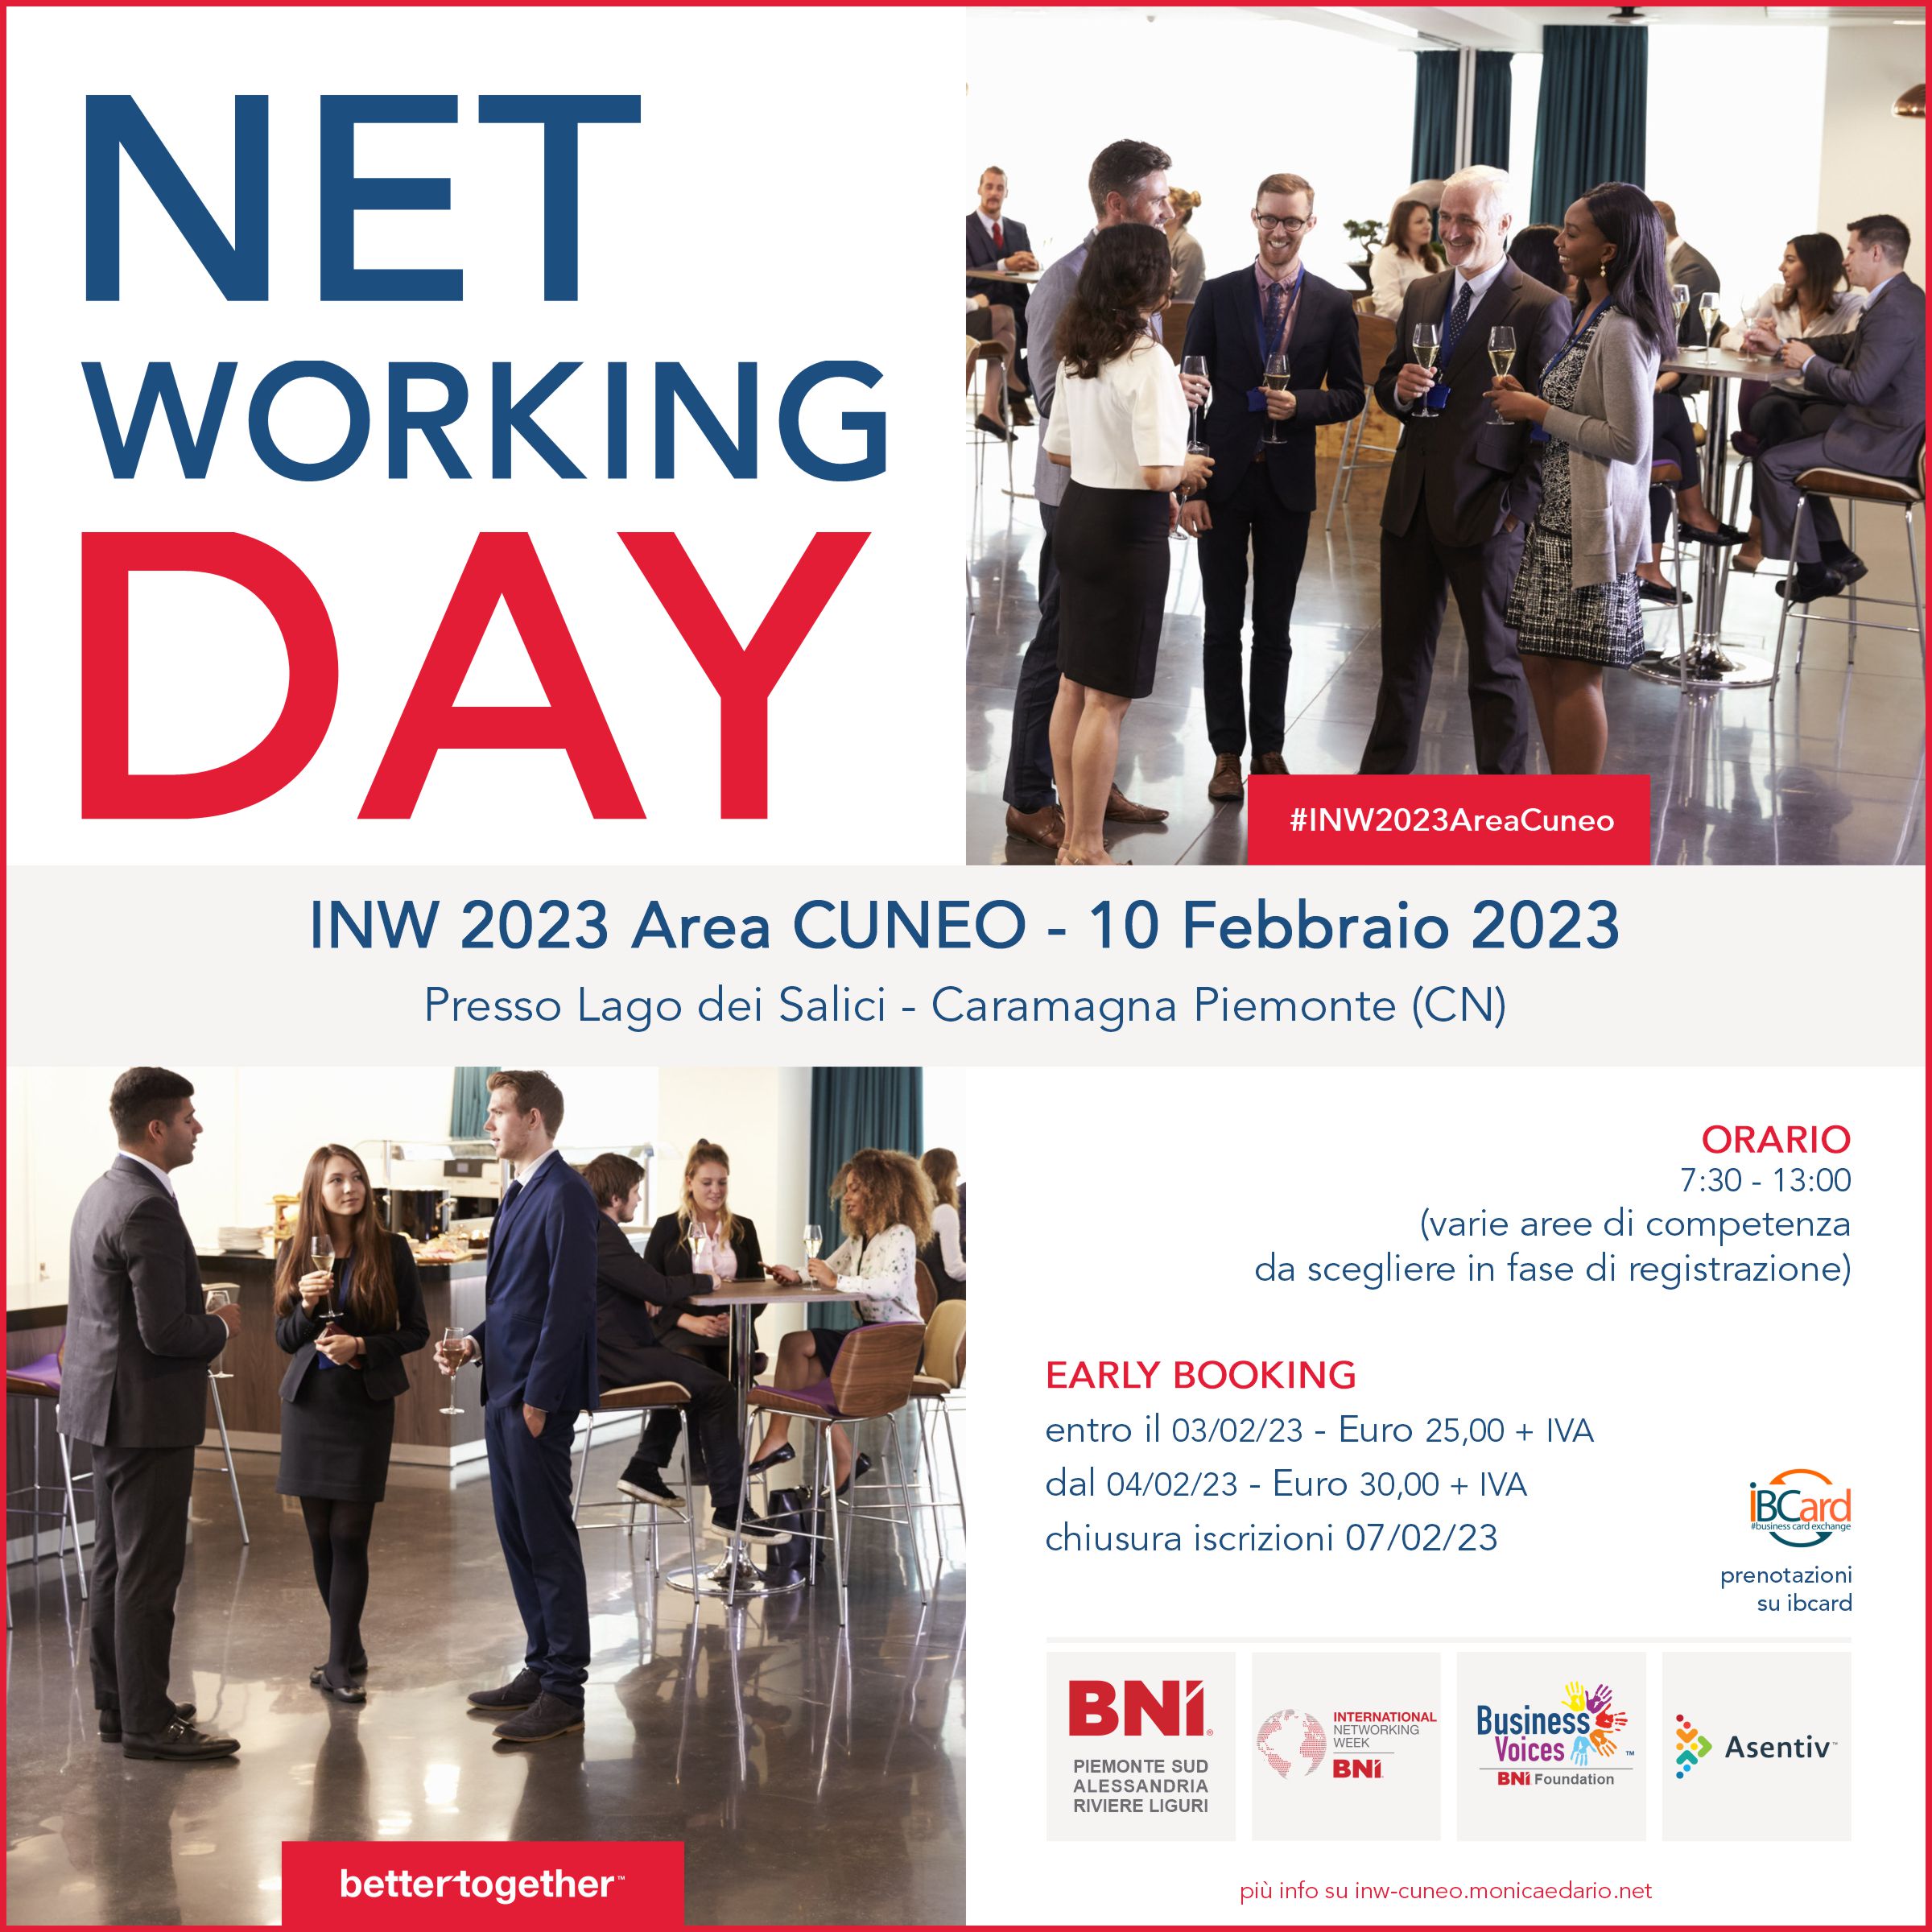 Networking Day - INW2023 Cuneo